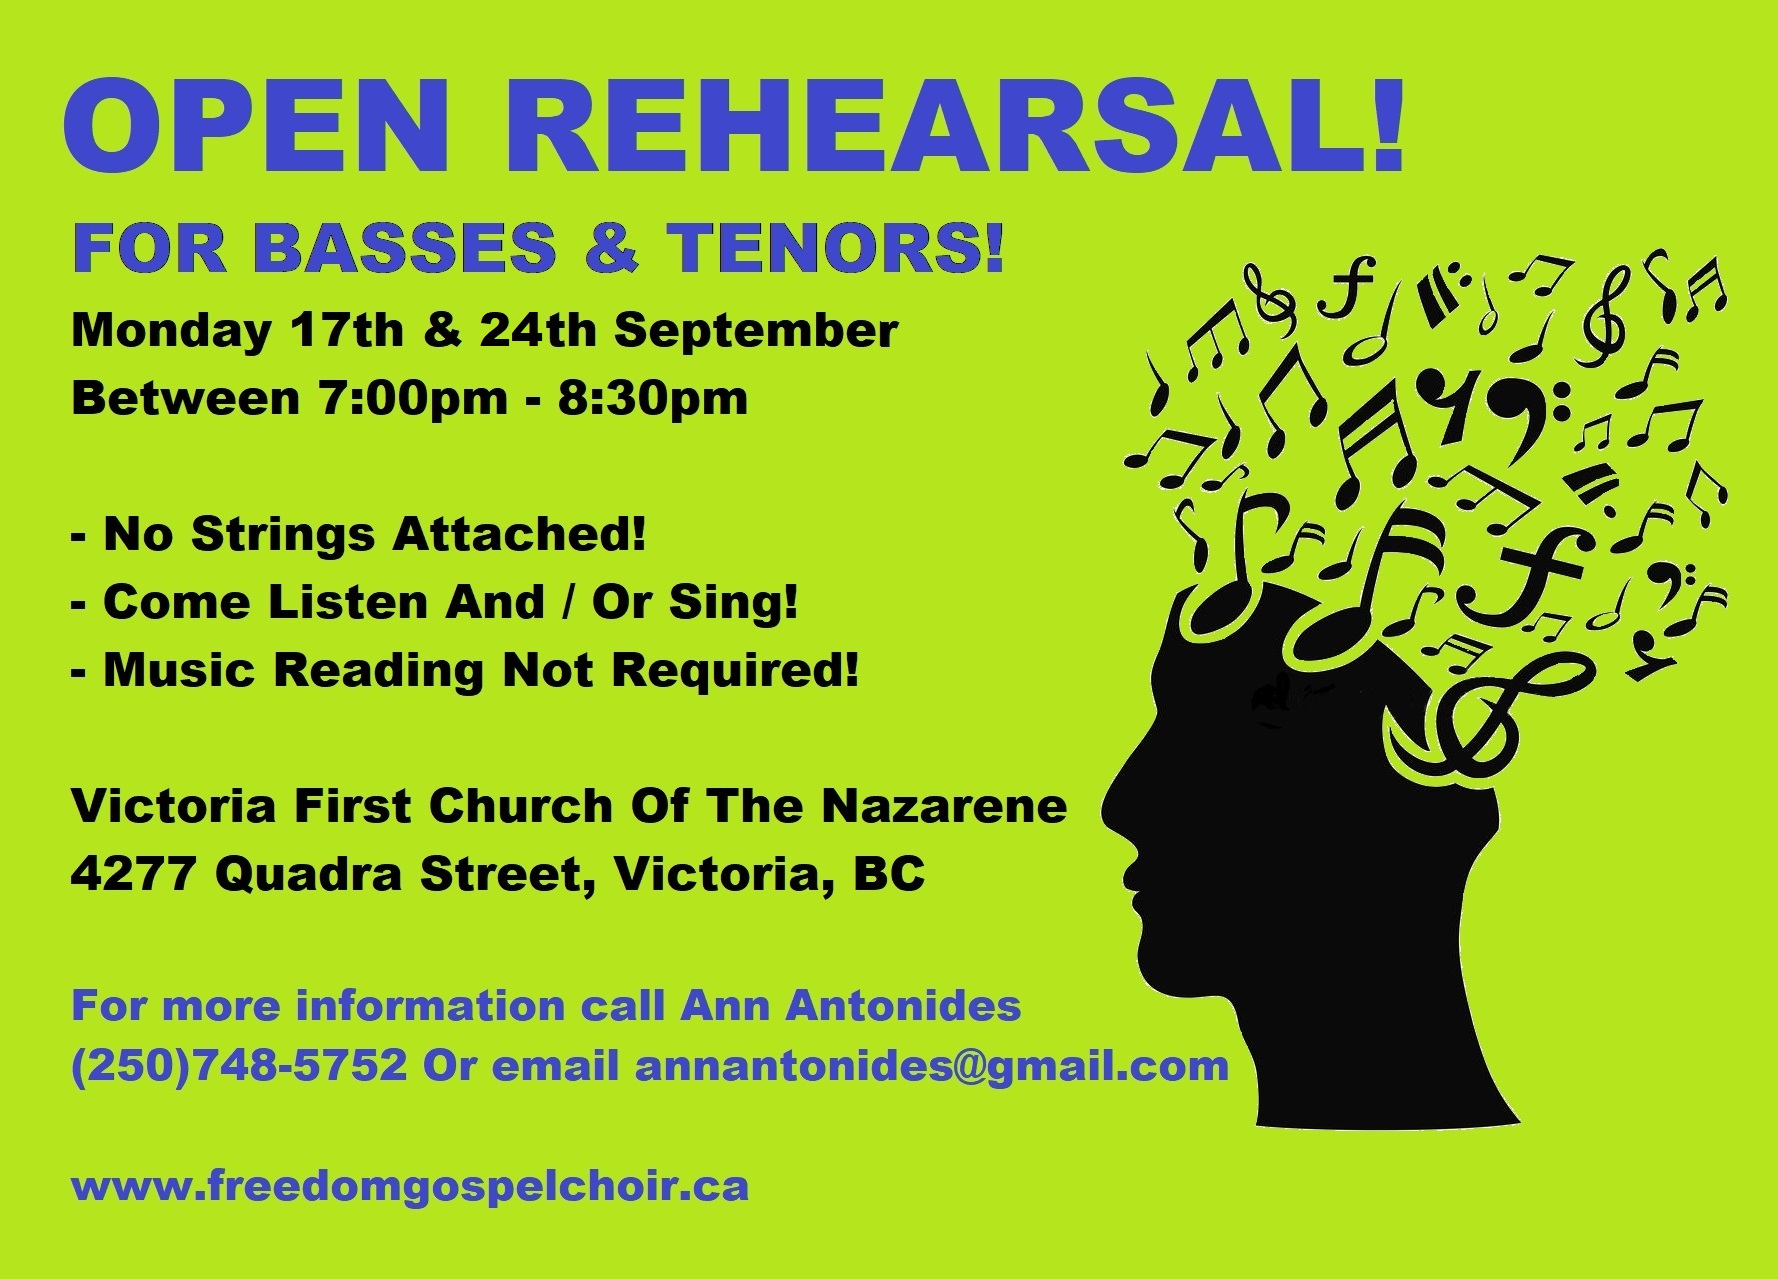 Open Rehearsal for Basses & Tenors in Victoria!